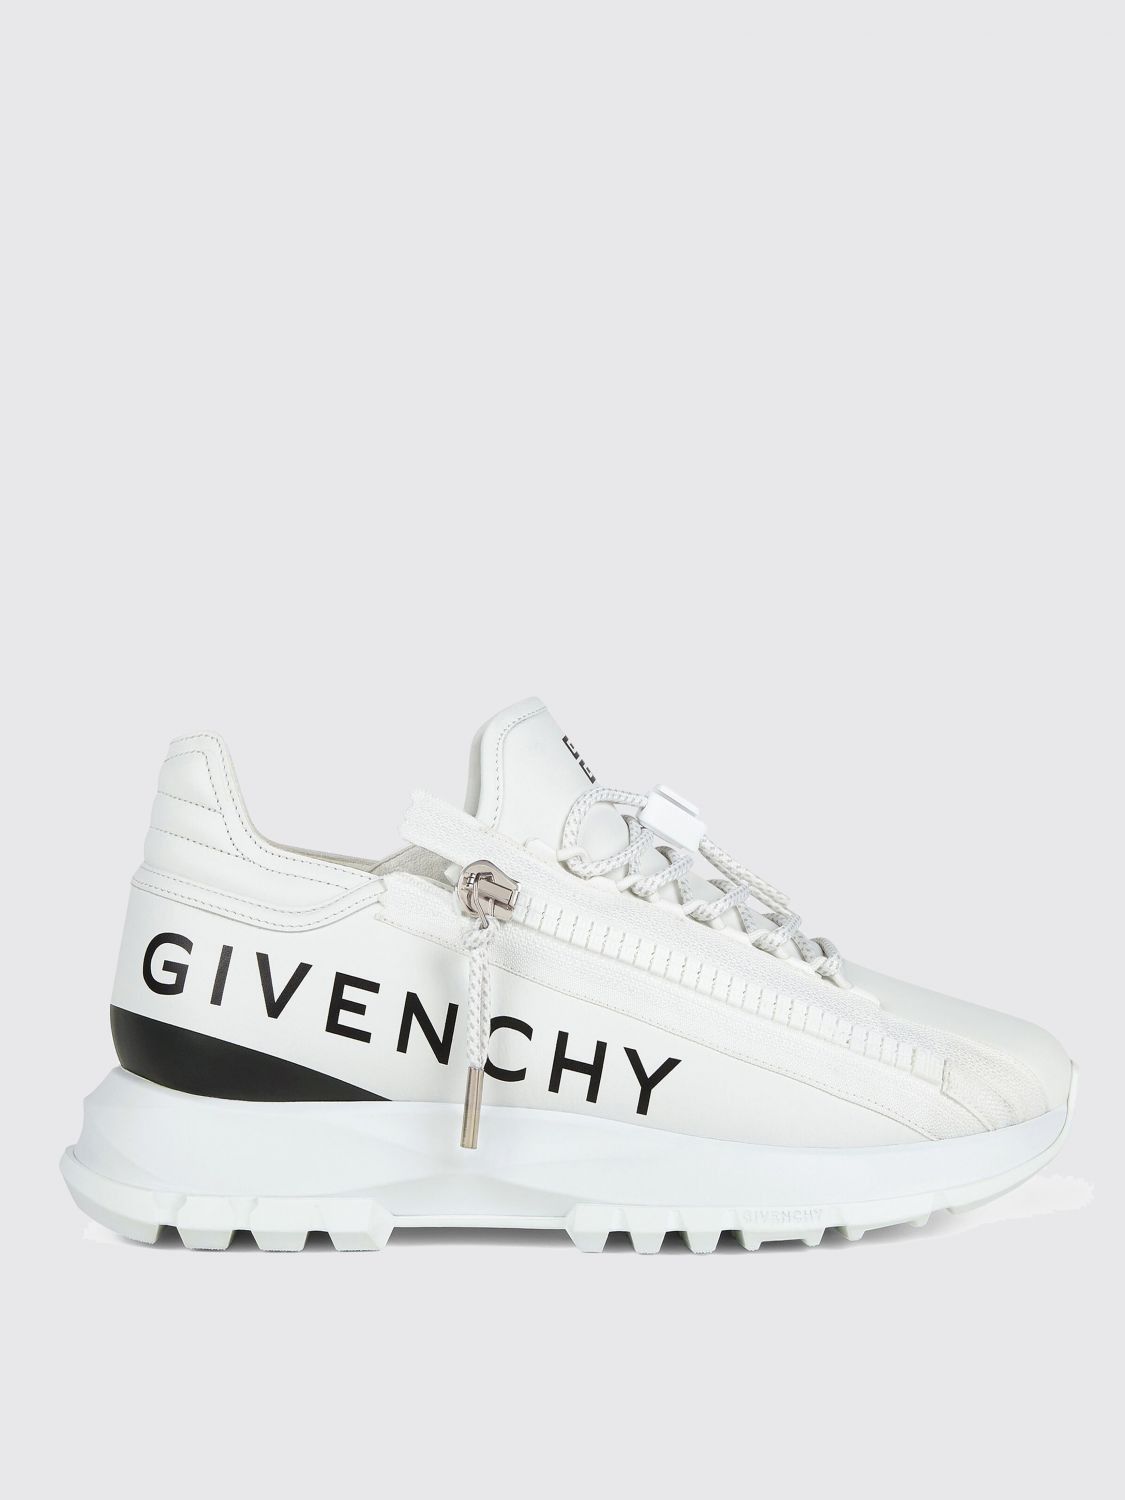 Givenchy Givenchy Sneakers Men White | Grailed